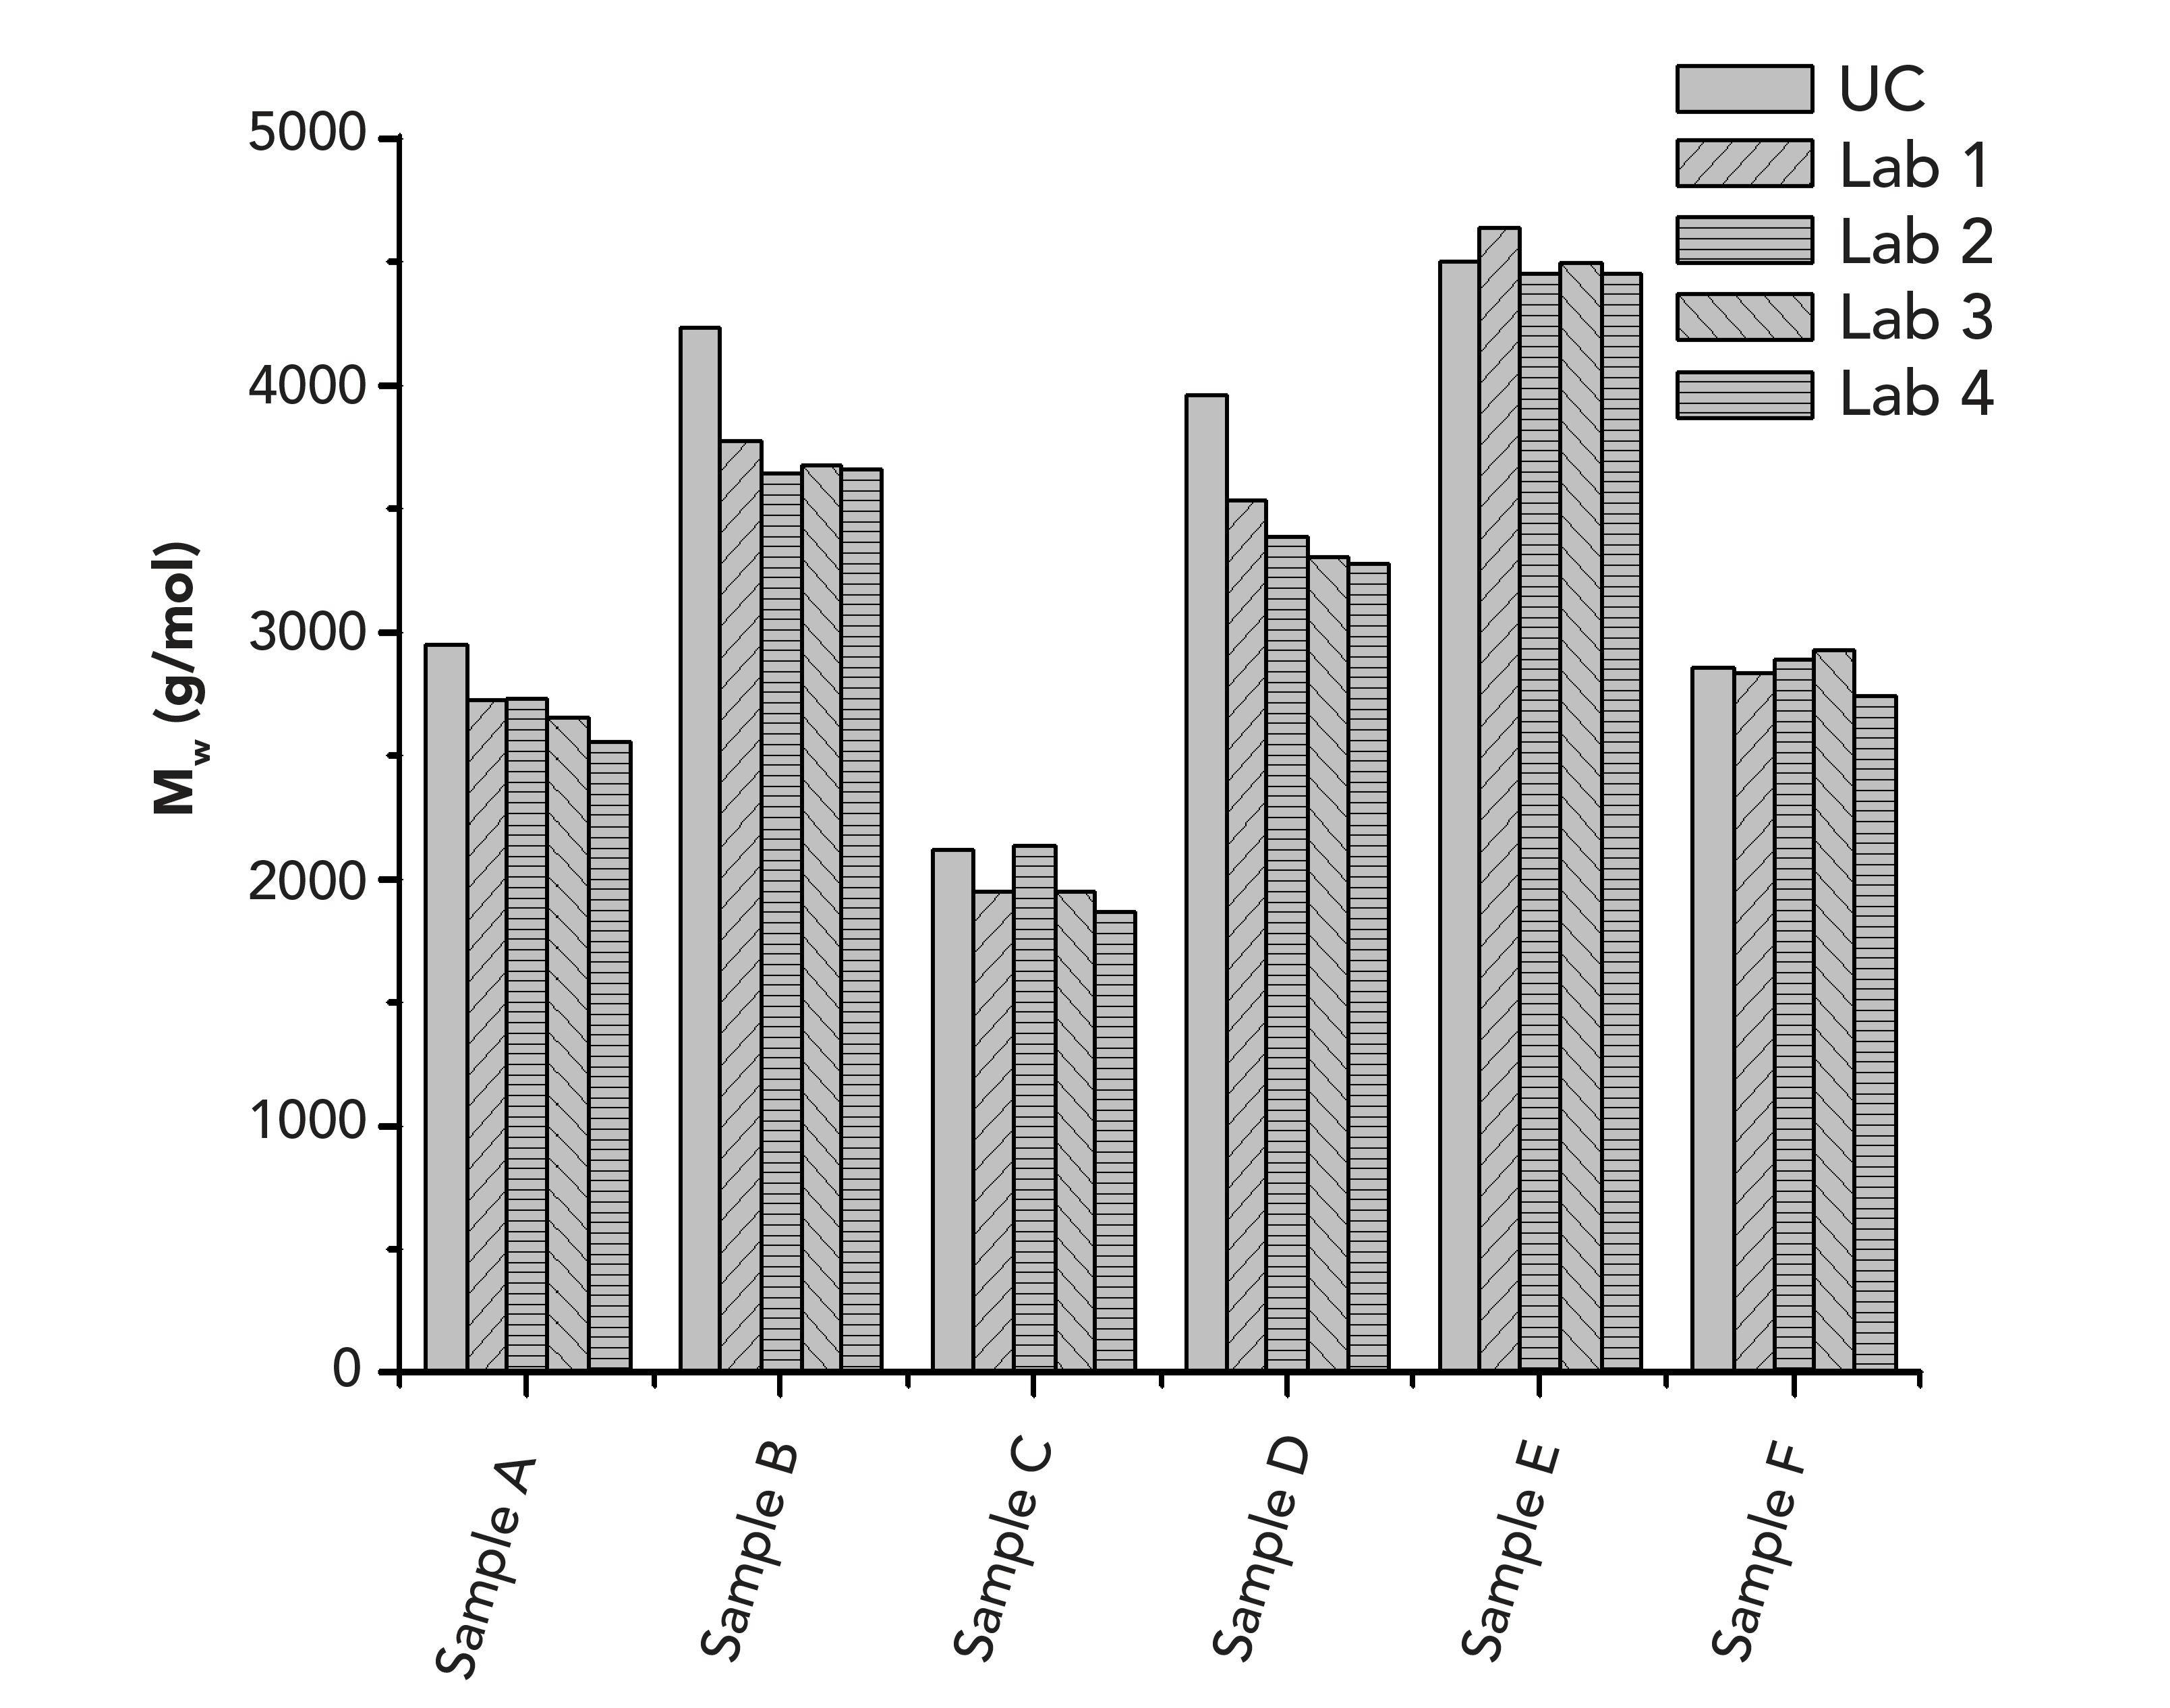 FIGURE 4: A graphical representation of the GPC/SEC results obtained independently in different laboratories.